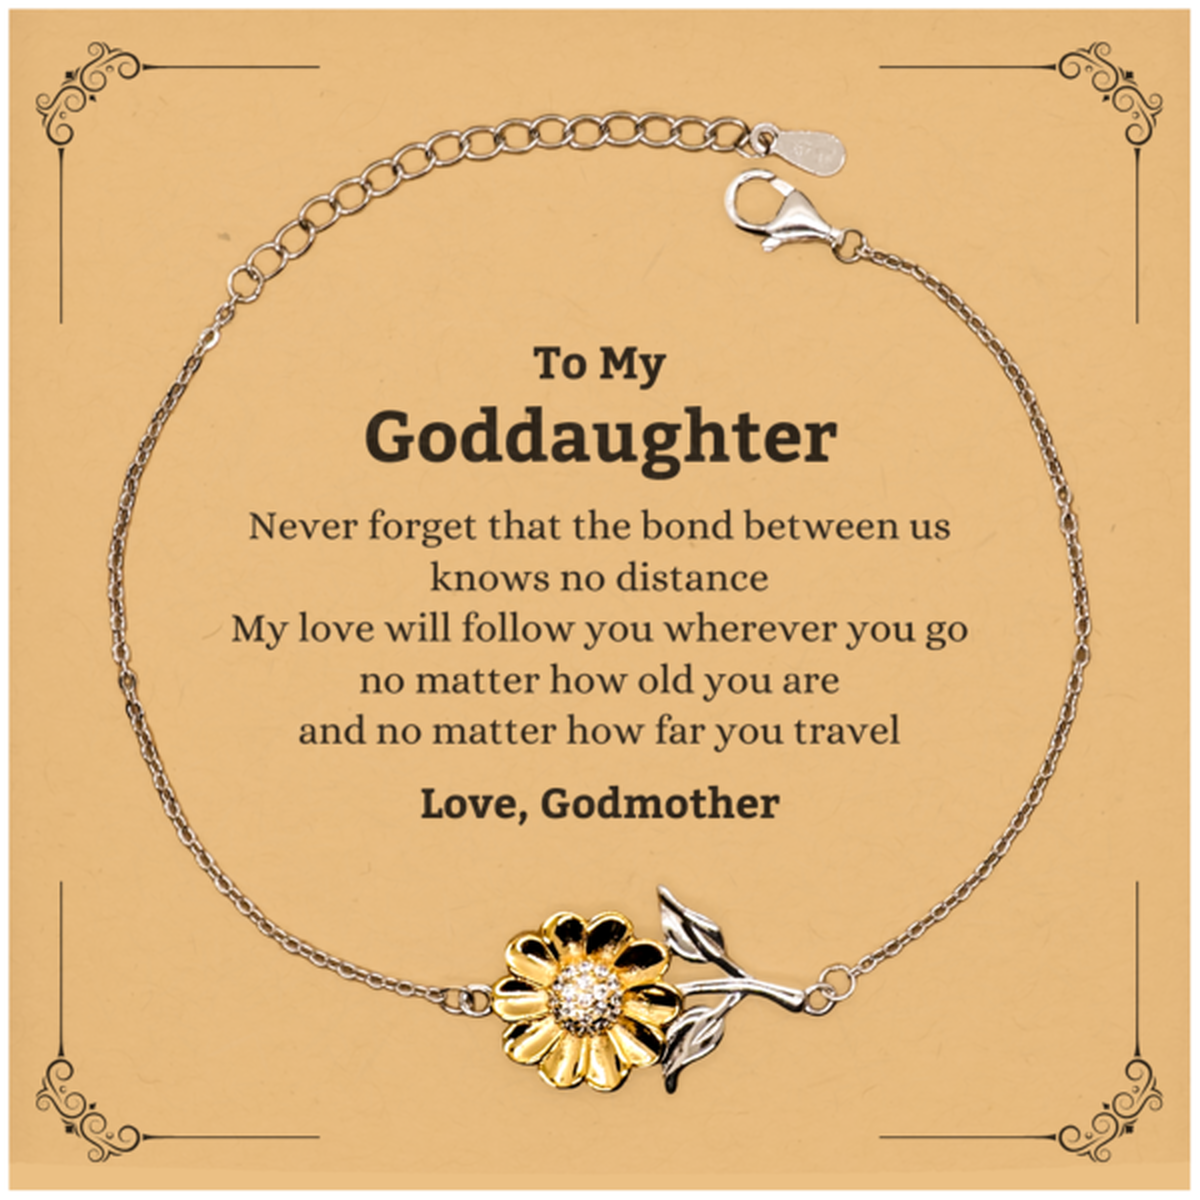 Goddaughter Birthday Gifts from Godmother, Adjustable Sunflower Bracelet for Goddaughter Christmas Graduation Unique Gifts Goddaughter Never forget that the bond between us knows no distance. Love, Godmother